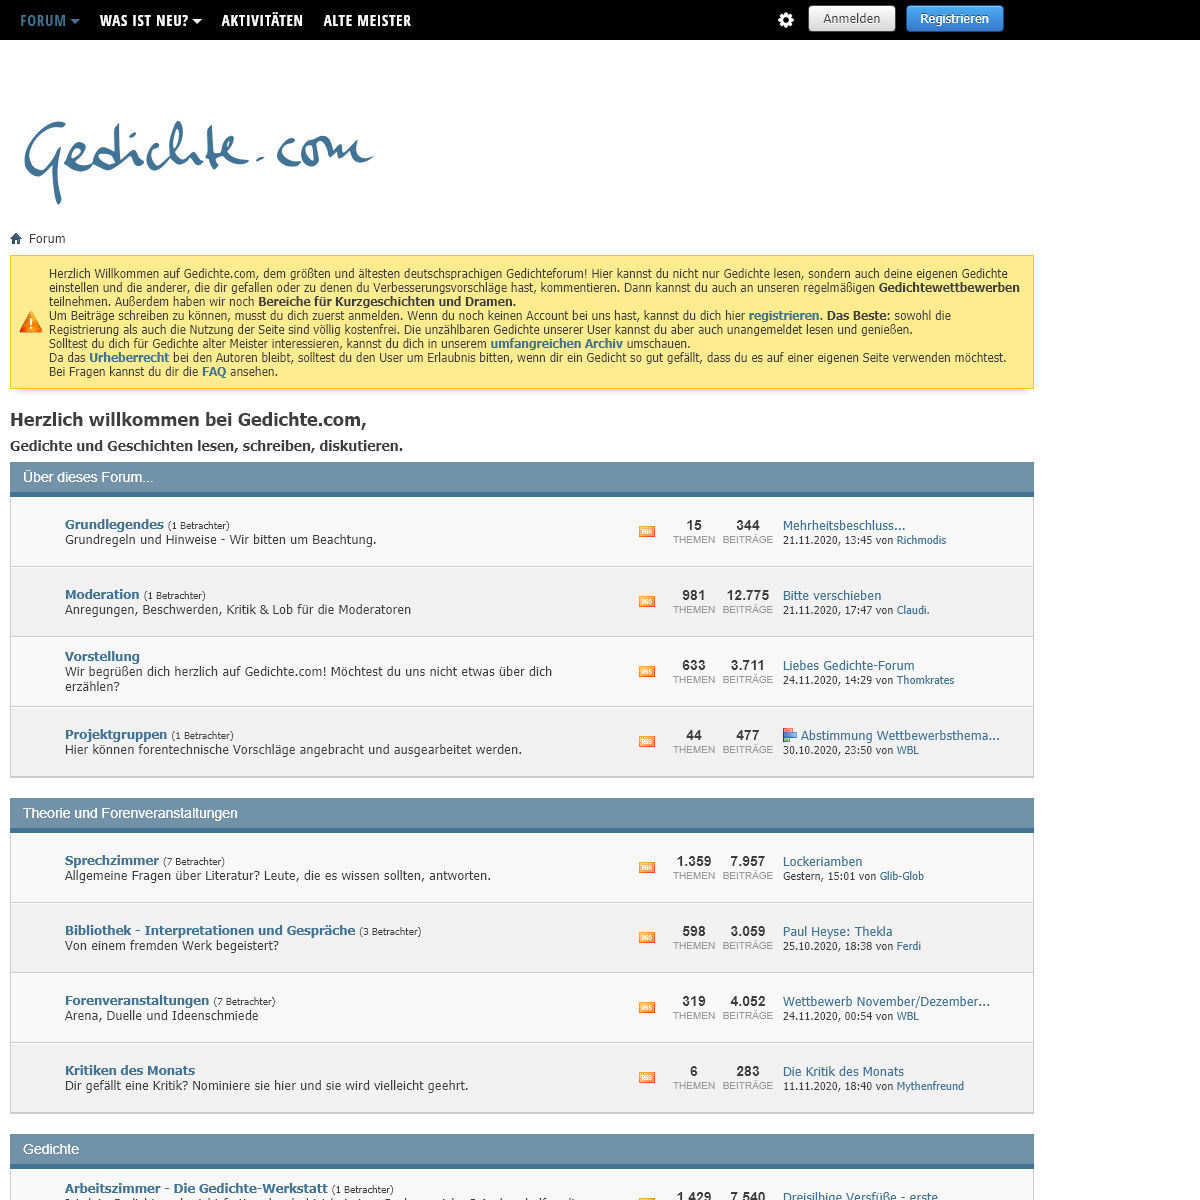 A complete backup of gedichte.com